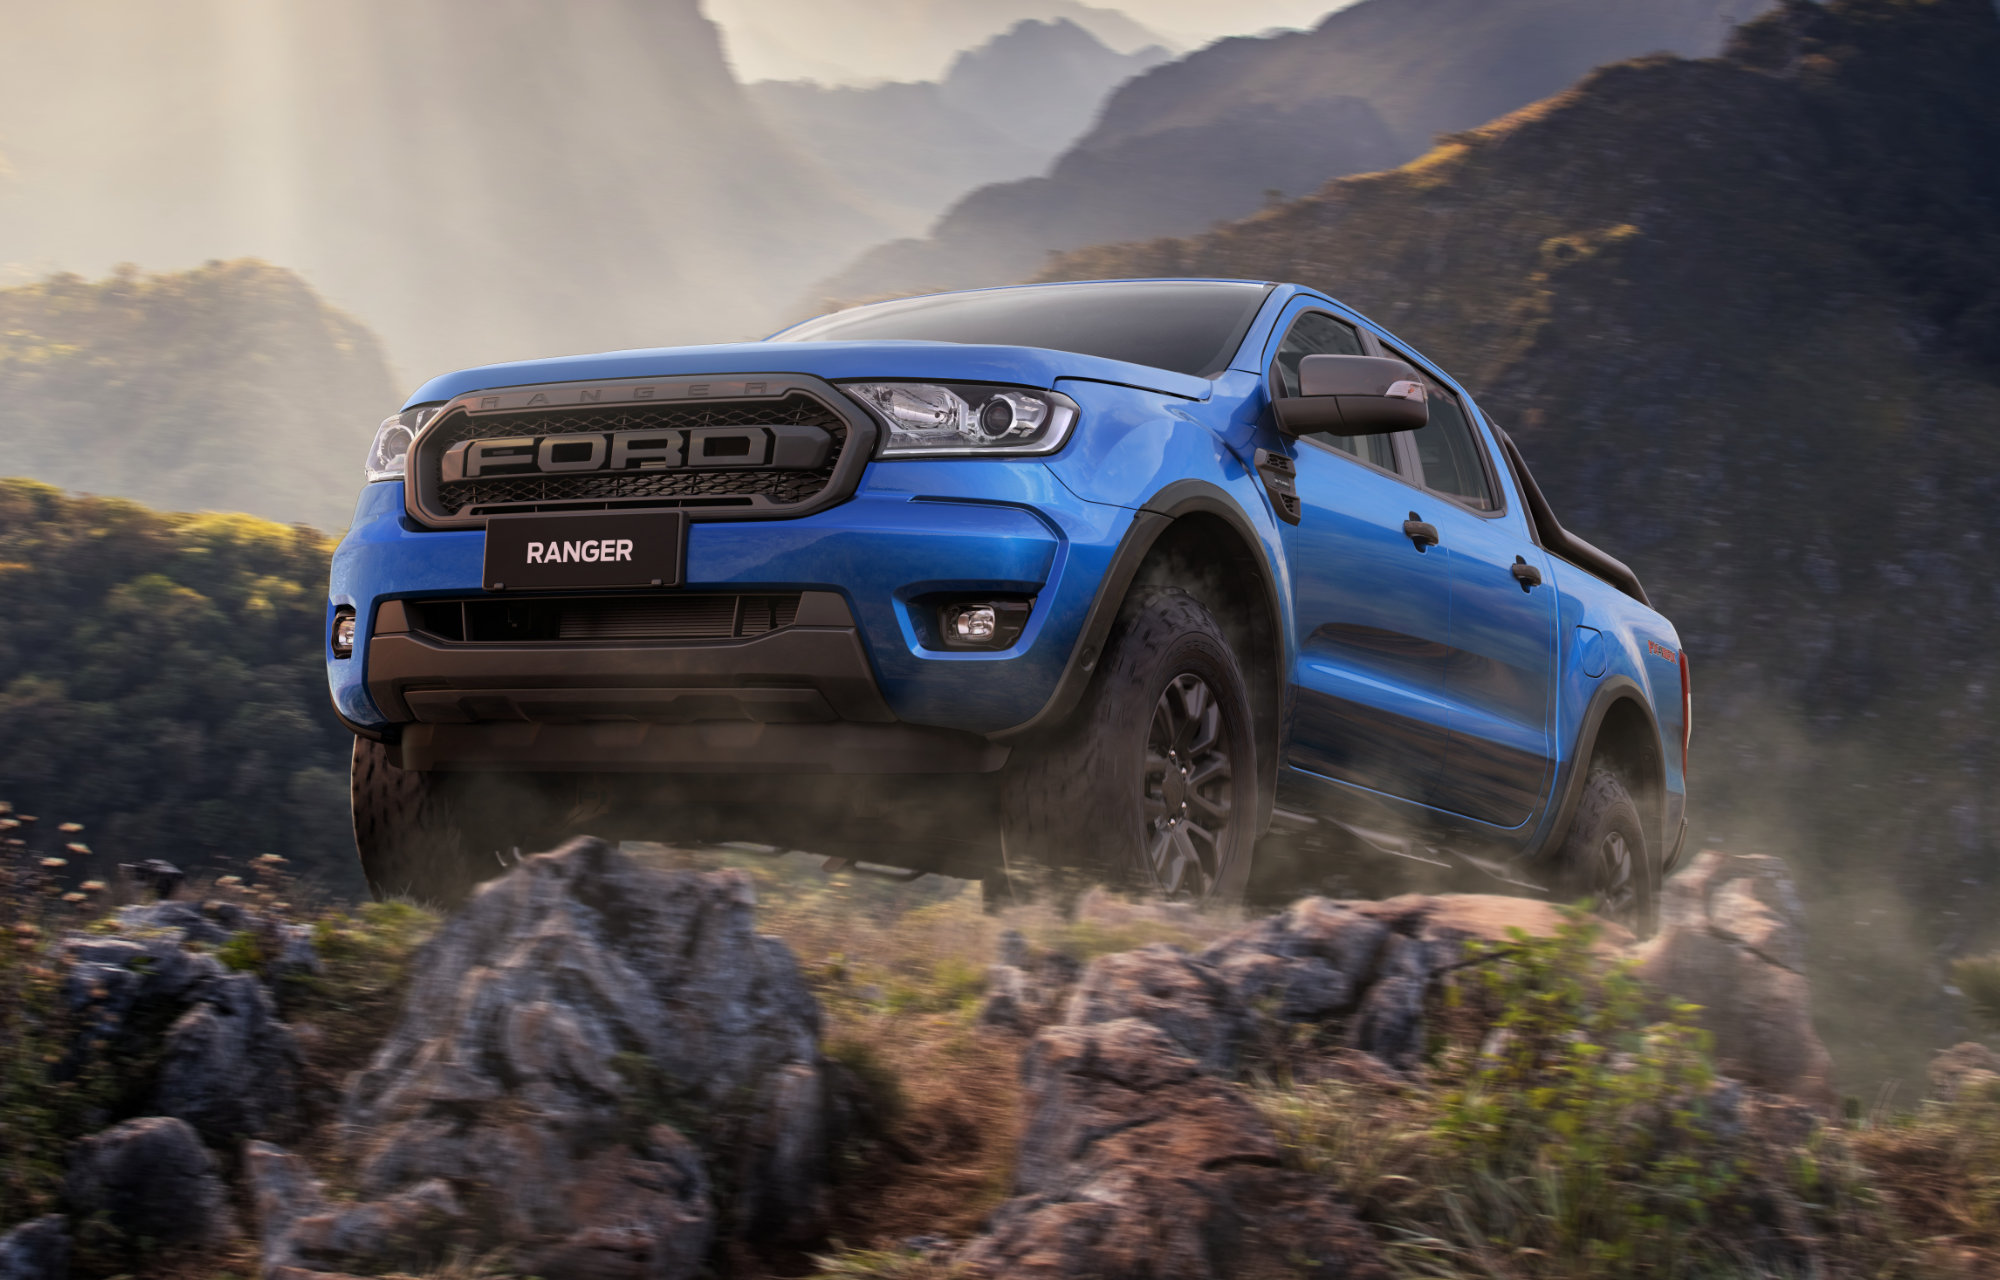 Ford Ranger Max Wallpapers